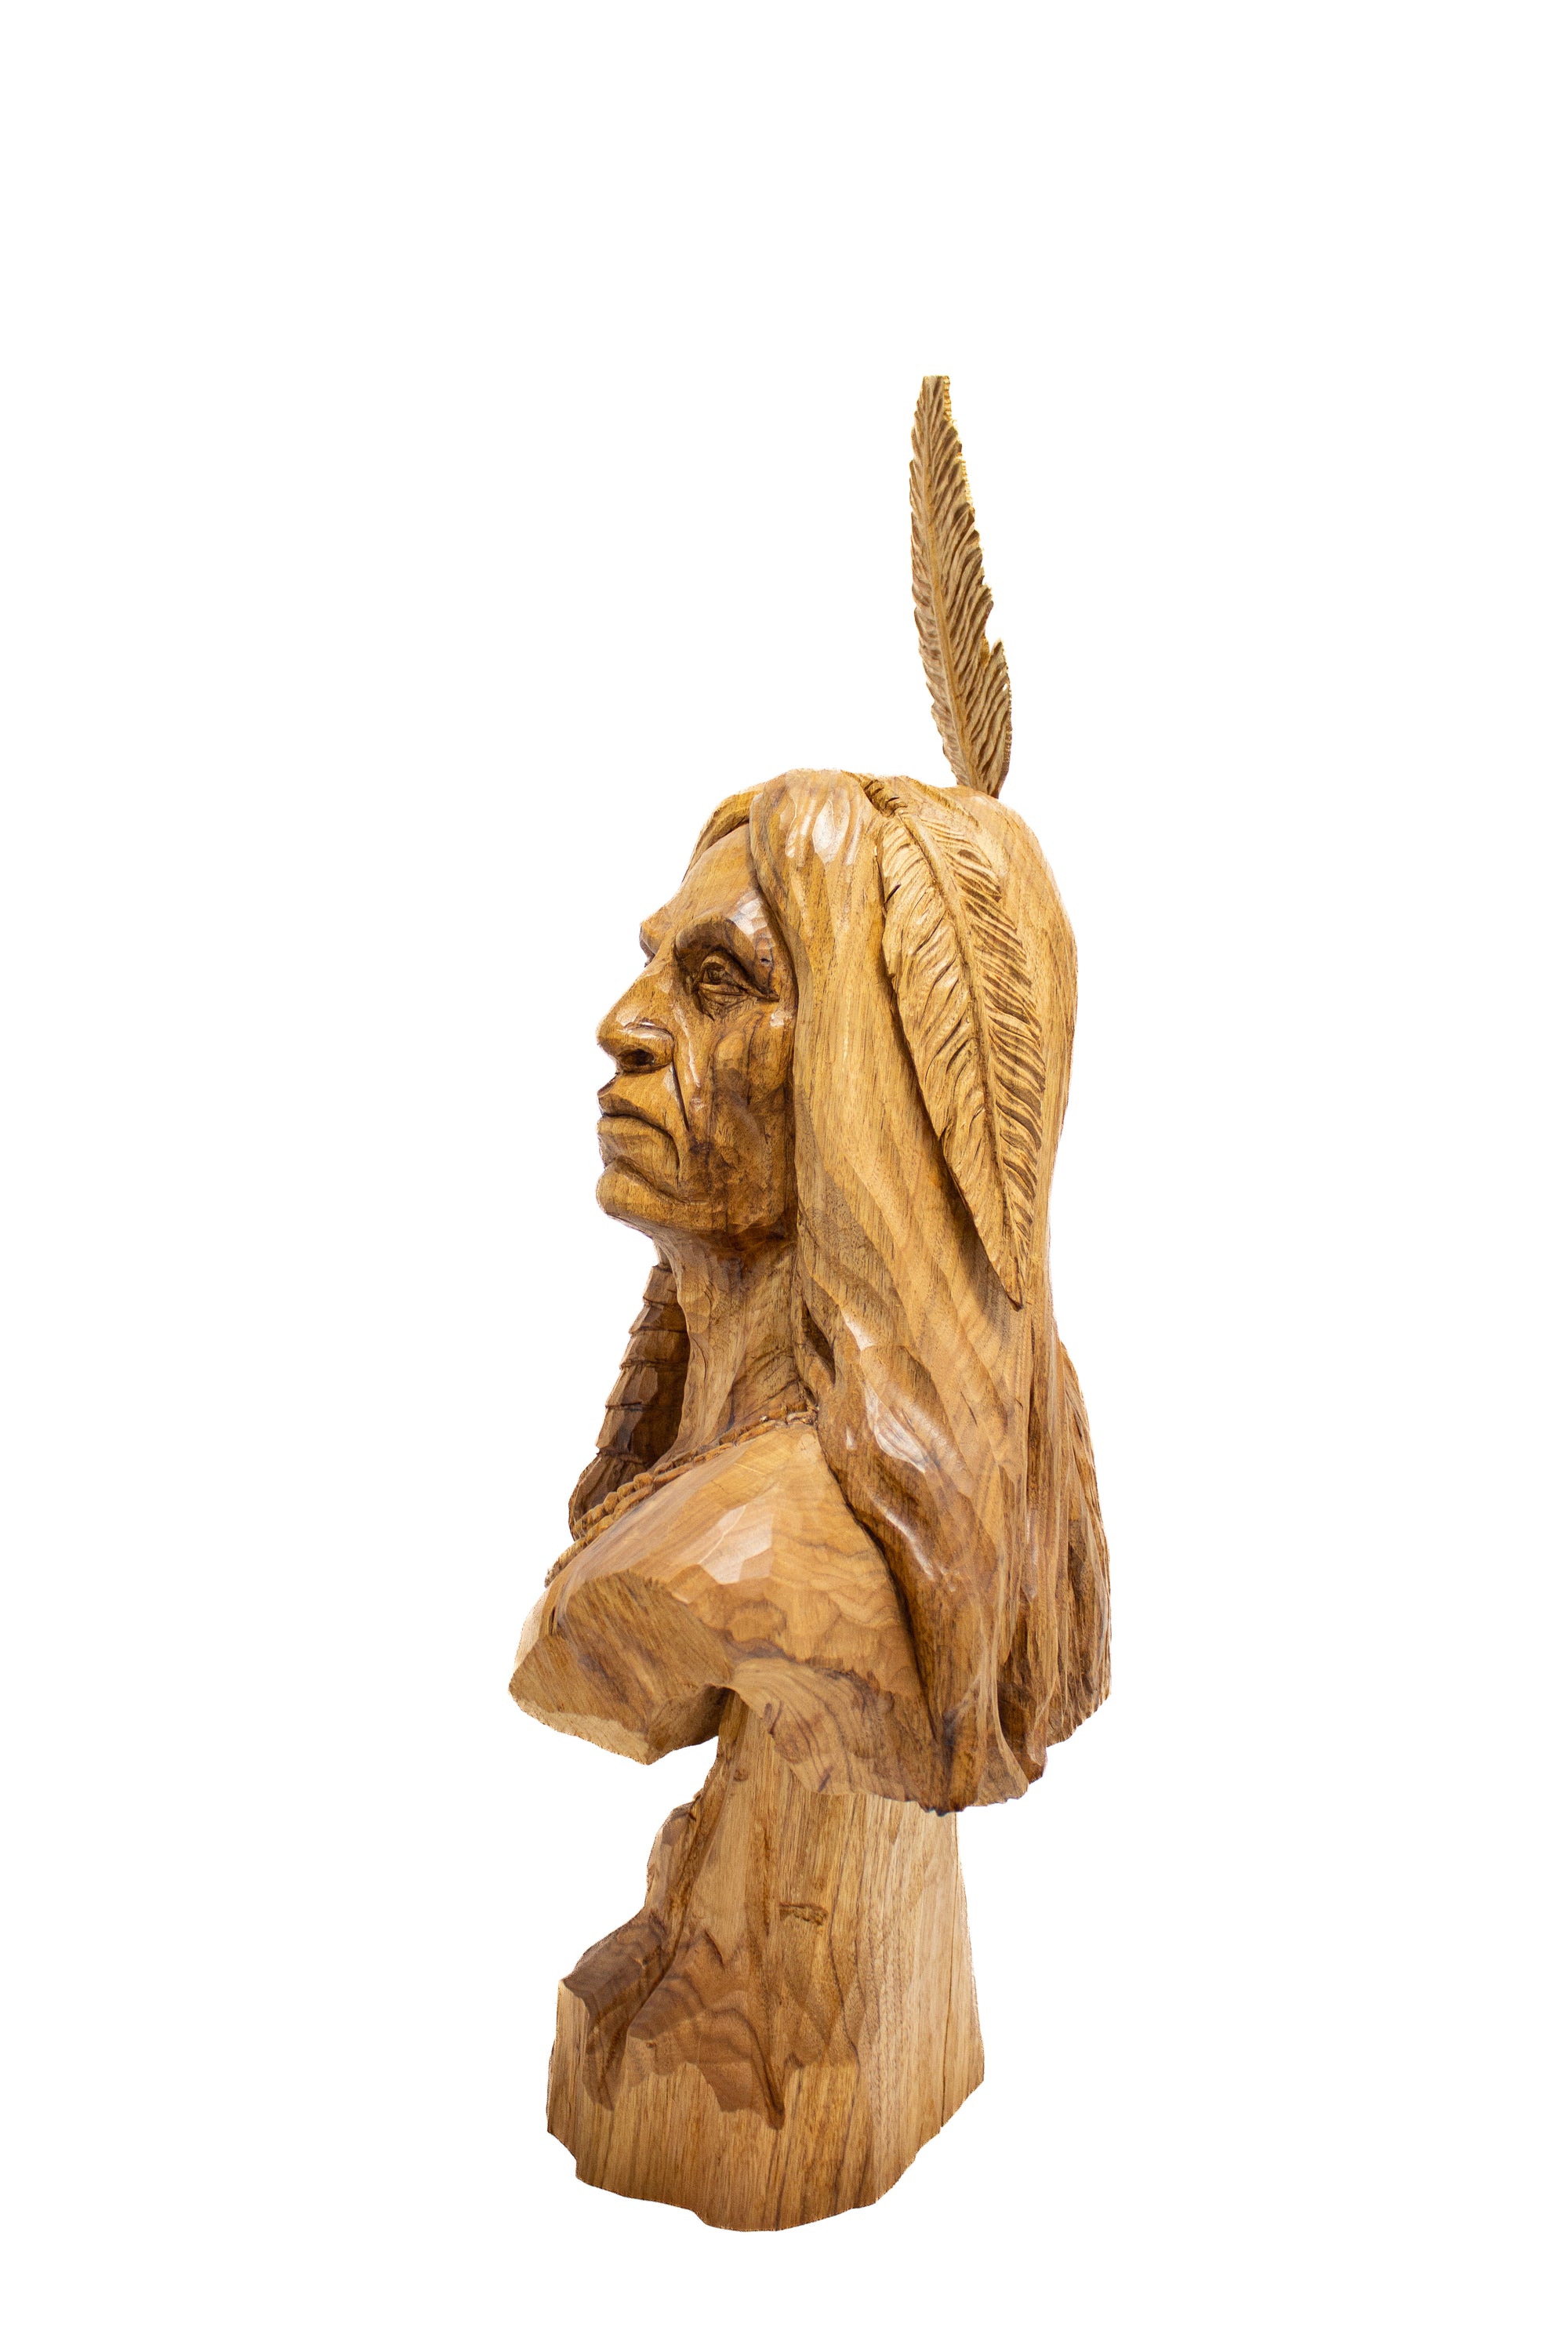 Native American Bust (Pick Up or In Person Purchase Only)